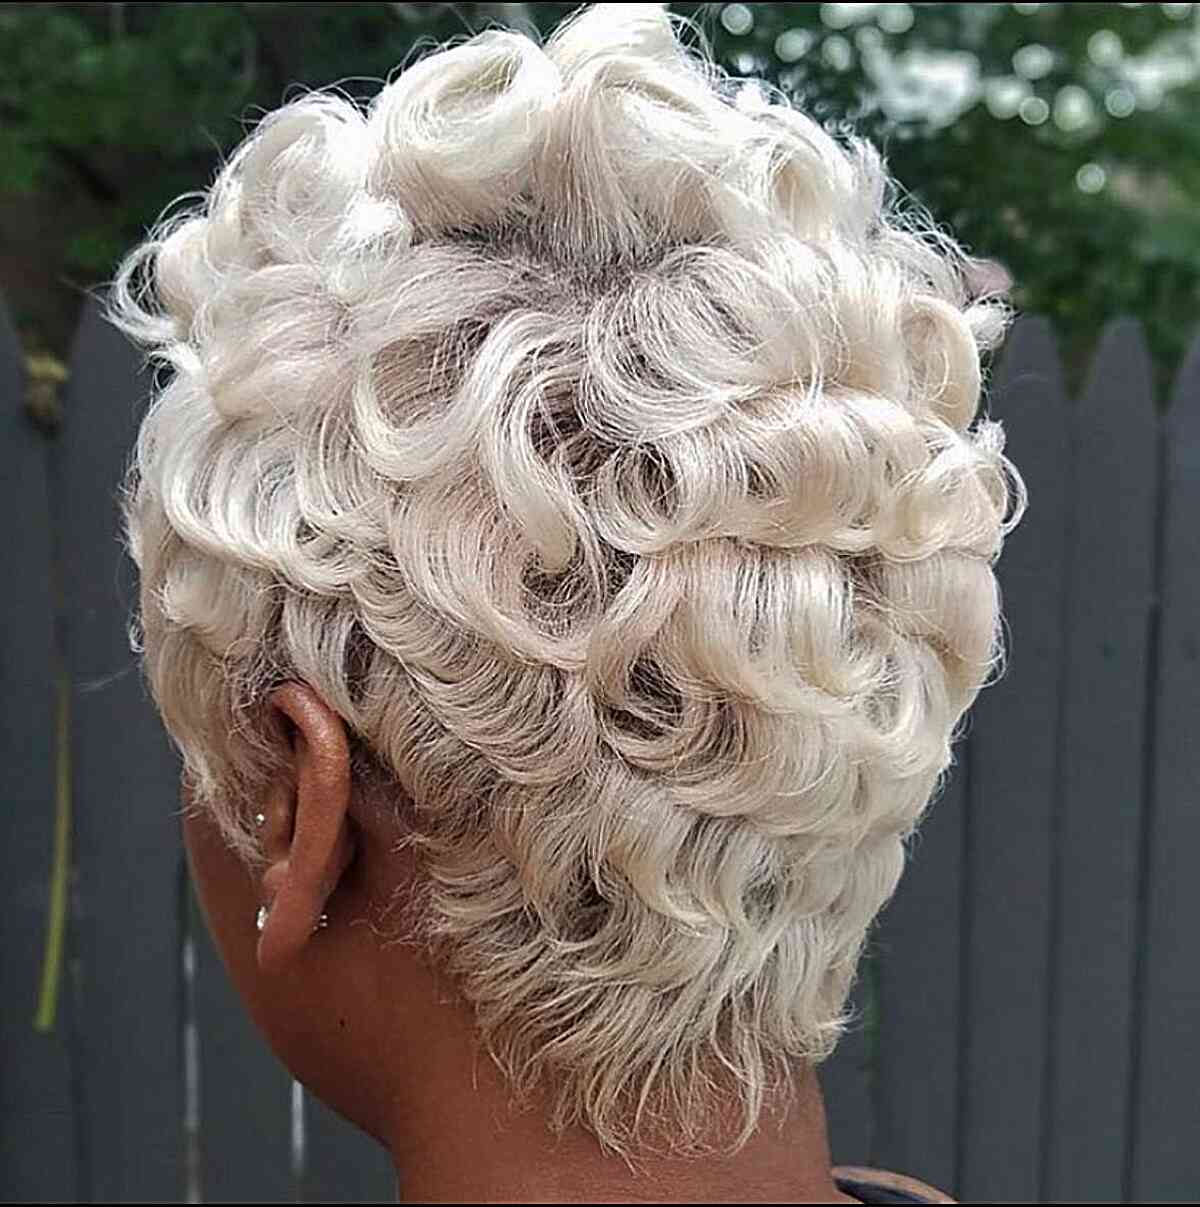 Black woman with a short pin curl hairstyle